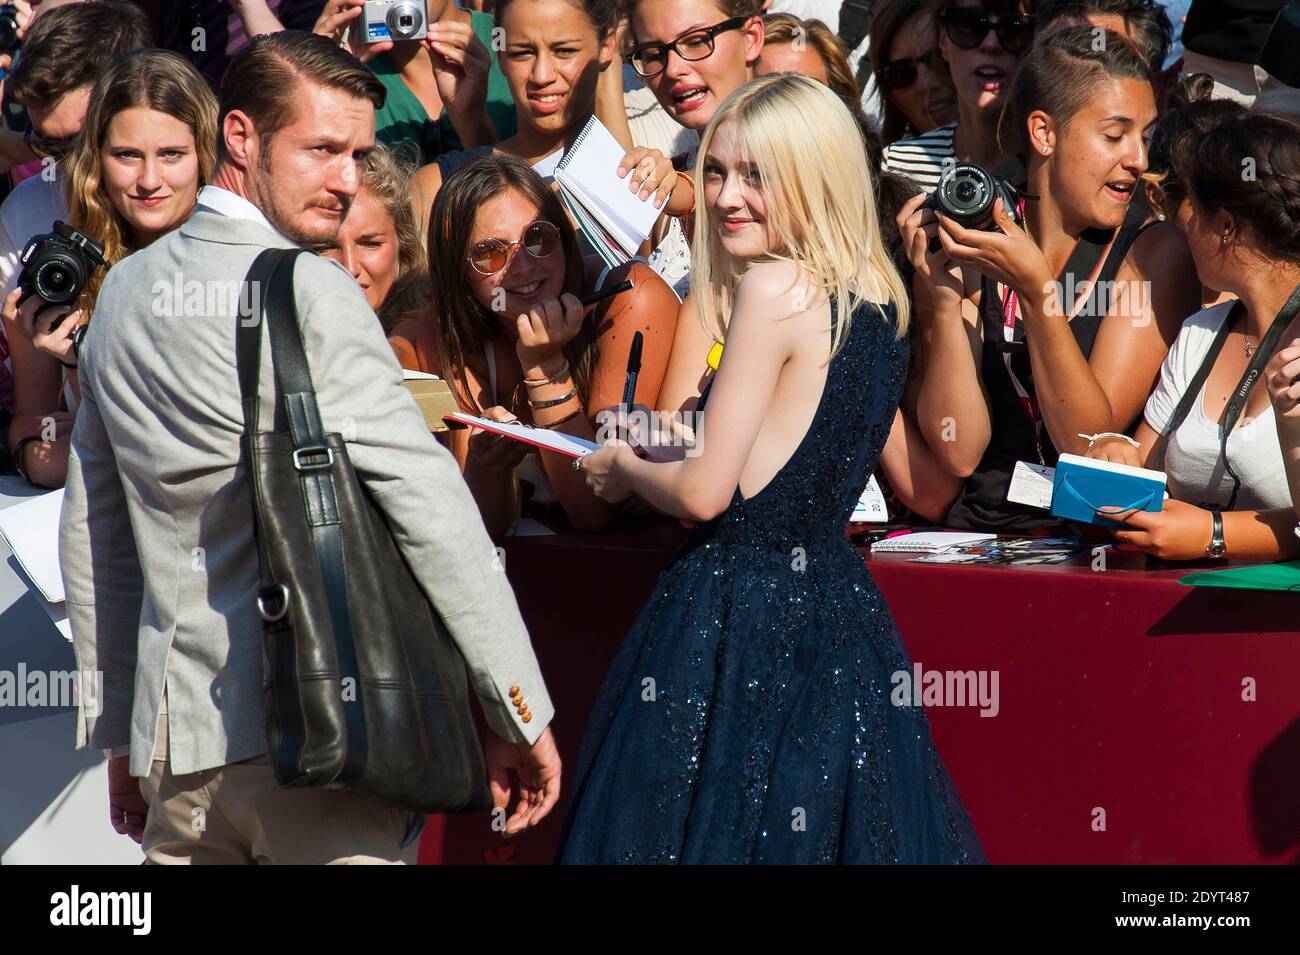 Dakota Fanning attending 'Night Moves' premiere during The 70th Venice International Film Festival held at Sala Grande in Venice, Italy on August 31, 2013. Photo by Nicolas Genin/ABACAPRESS.COM Stock Photo